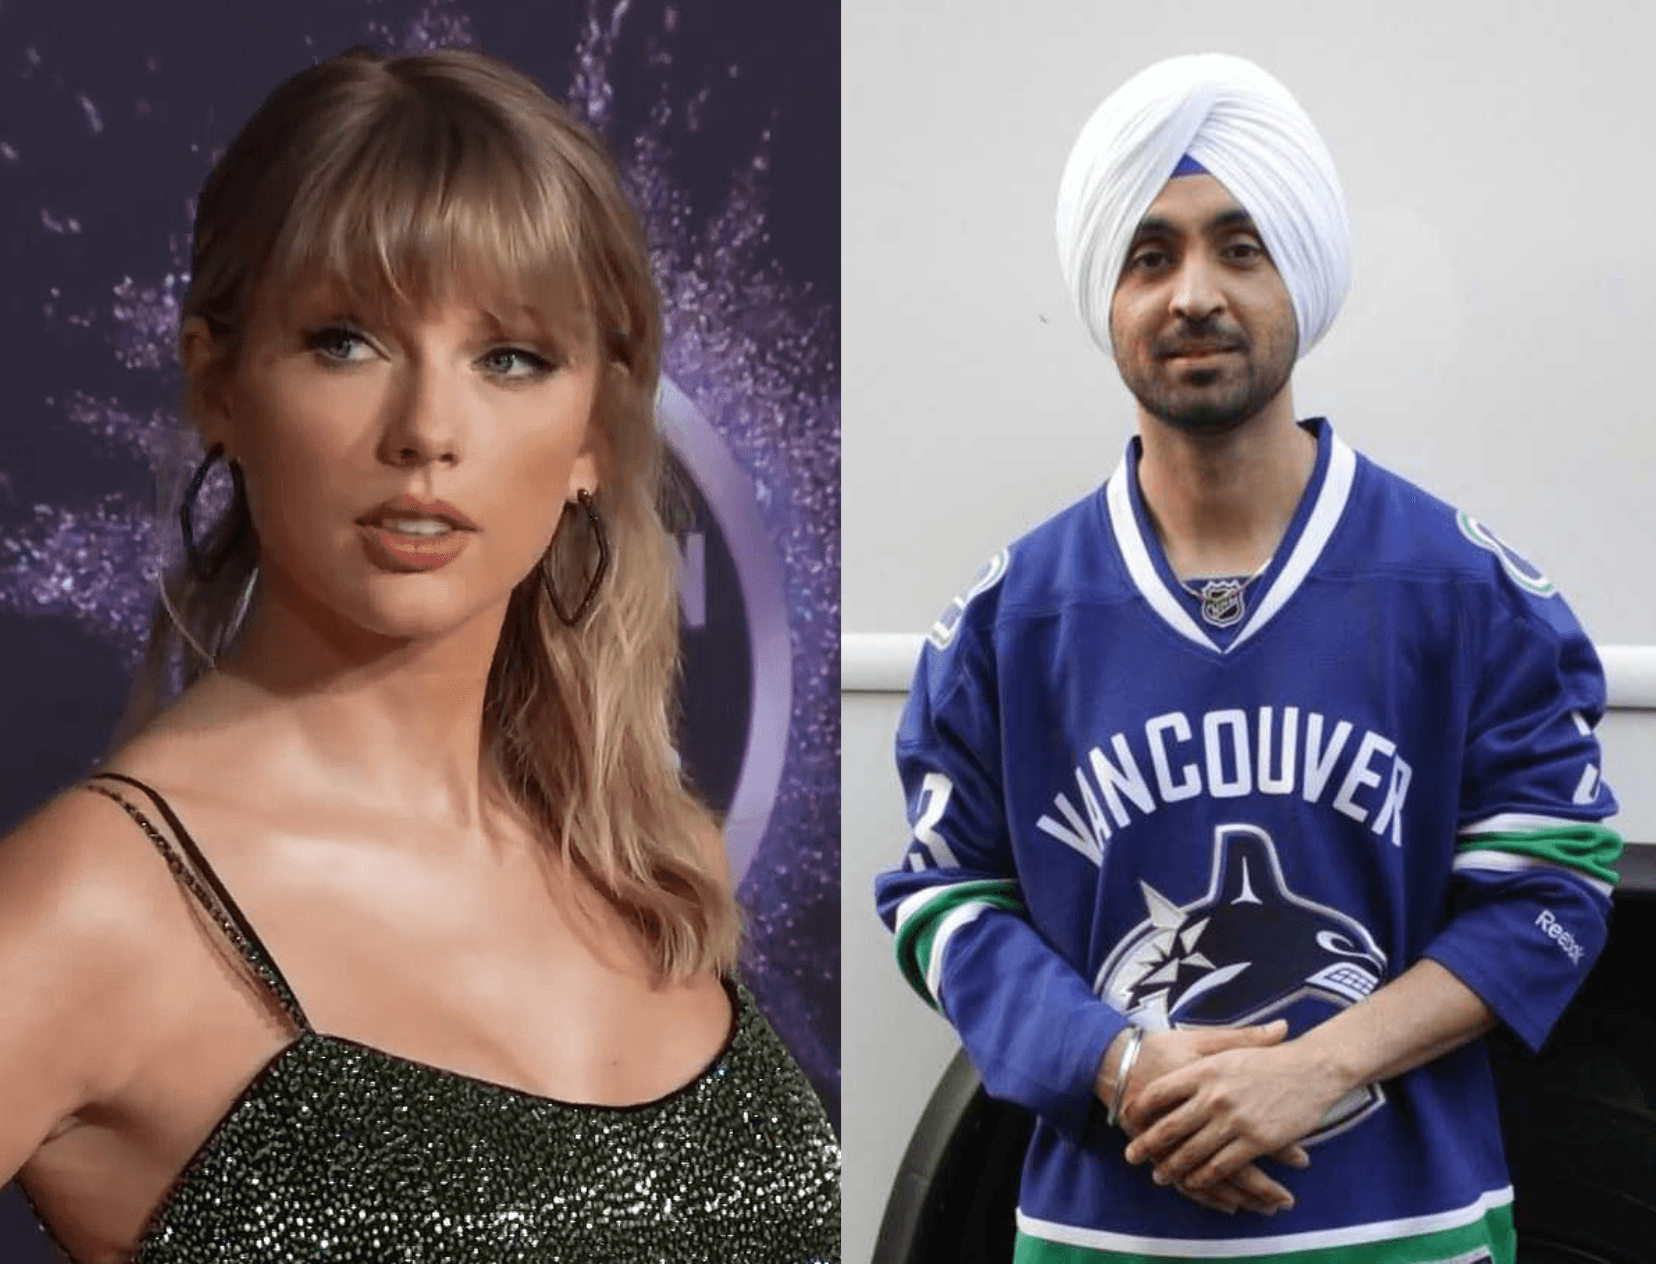 Did Diljit Dosanjh Just Confirm Relationship Rumours With Taylor Swift?